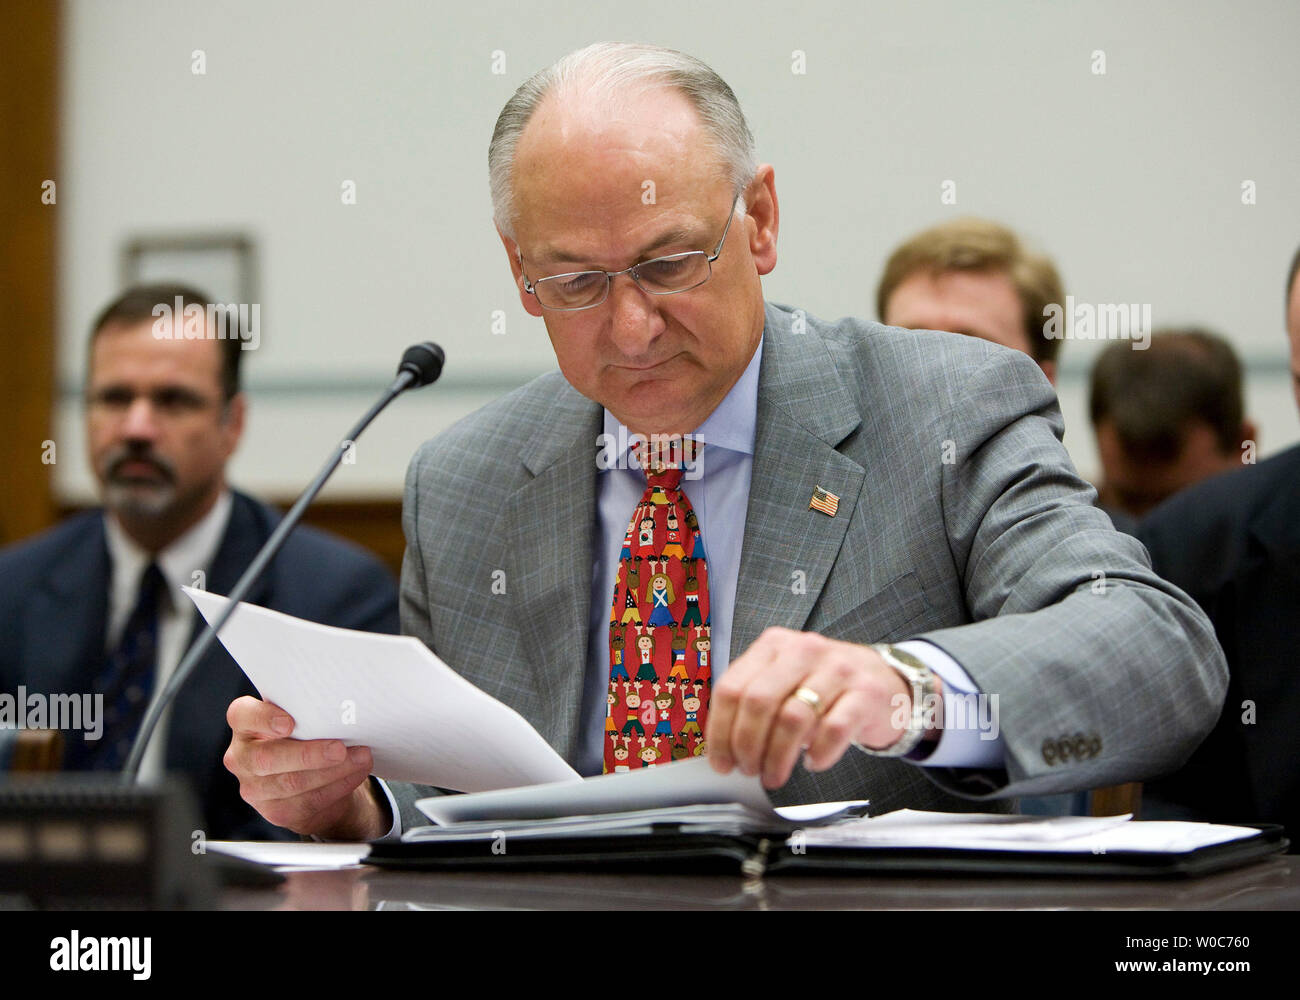 James Finley, Deputy Undersecretary of Defense for Acquisition and Technology, prepares to testify during a joint Senate Oversight and Government Reform Committee and National Security and Foreign Affairs Subcommittee hearing on Defense Department Acquisitions on Capitol Hill in Washington on April 29, 2008. (UPI Photo/Patrick D. McDermott) Stock Photo